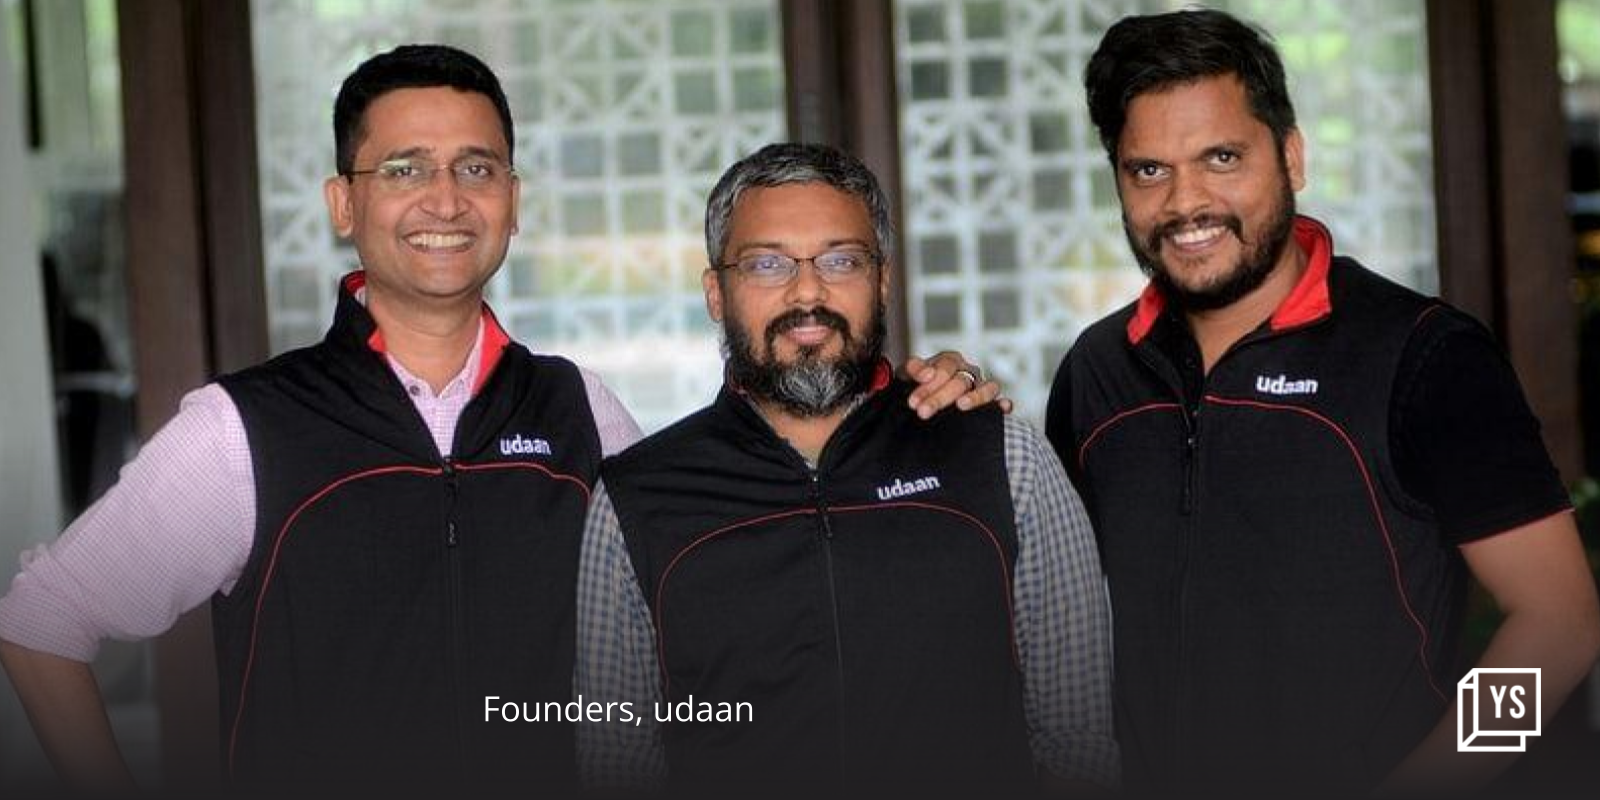 udaan announces ‘4X4 Delivery Service’ for pharmacies